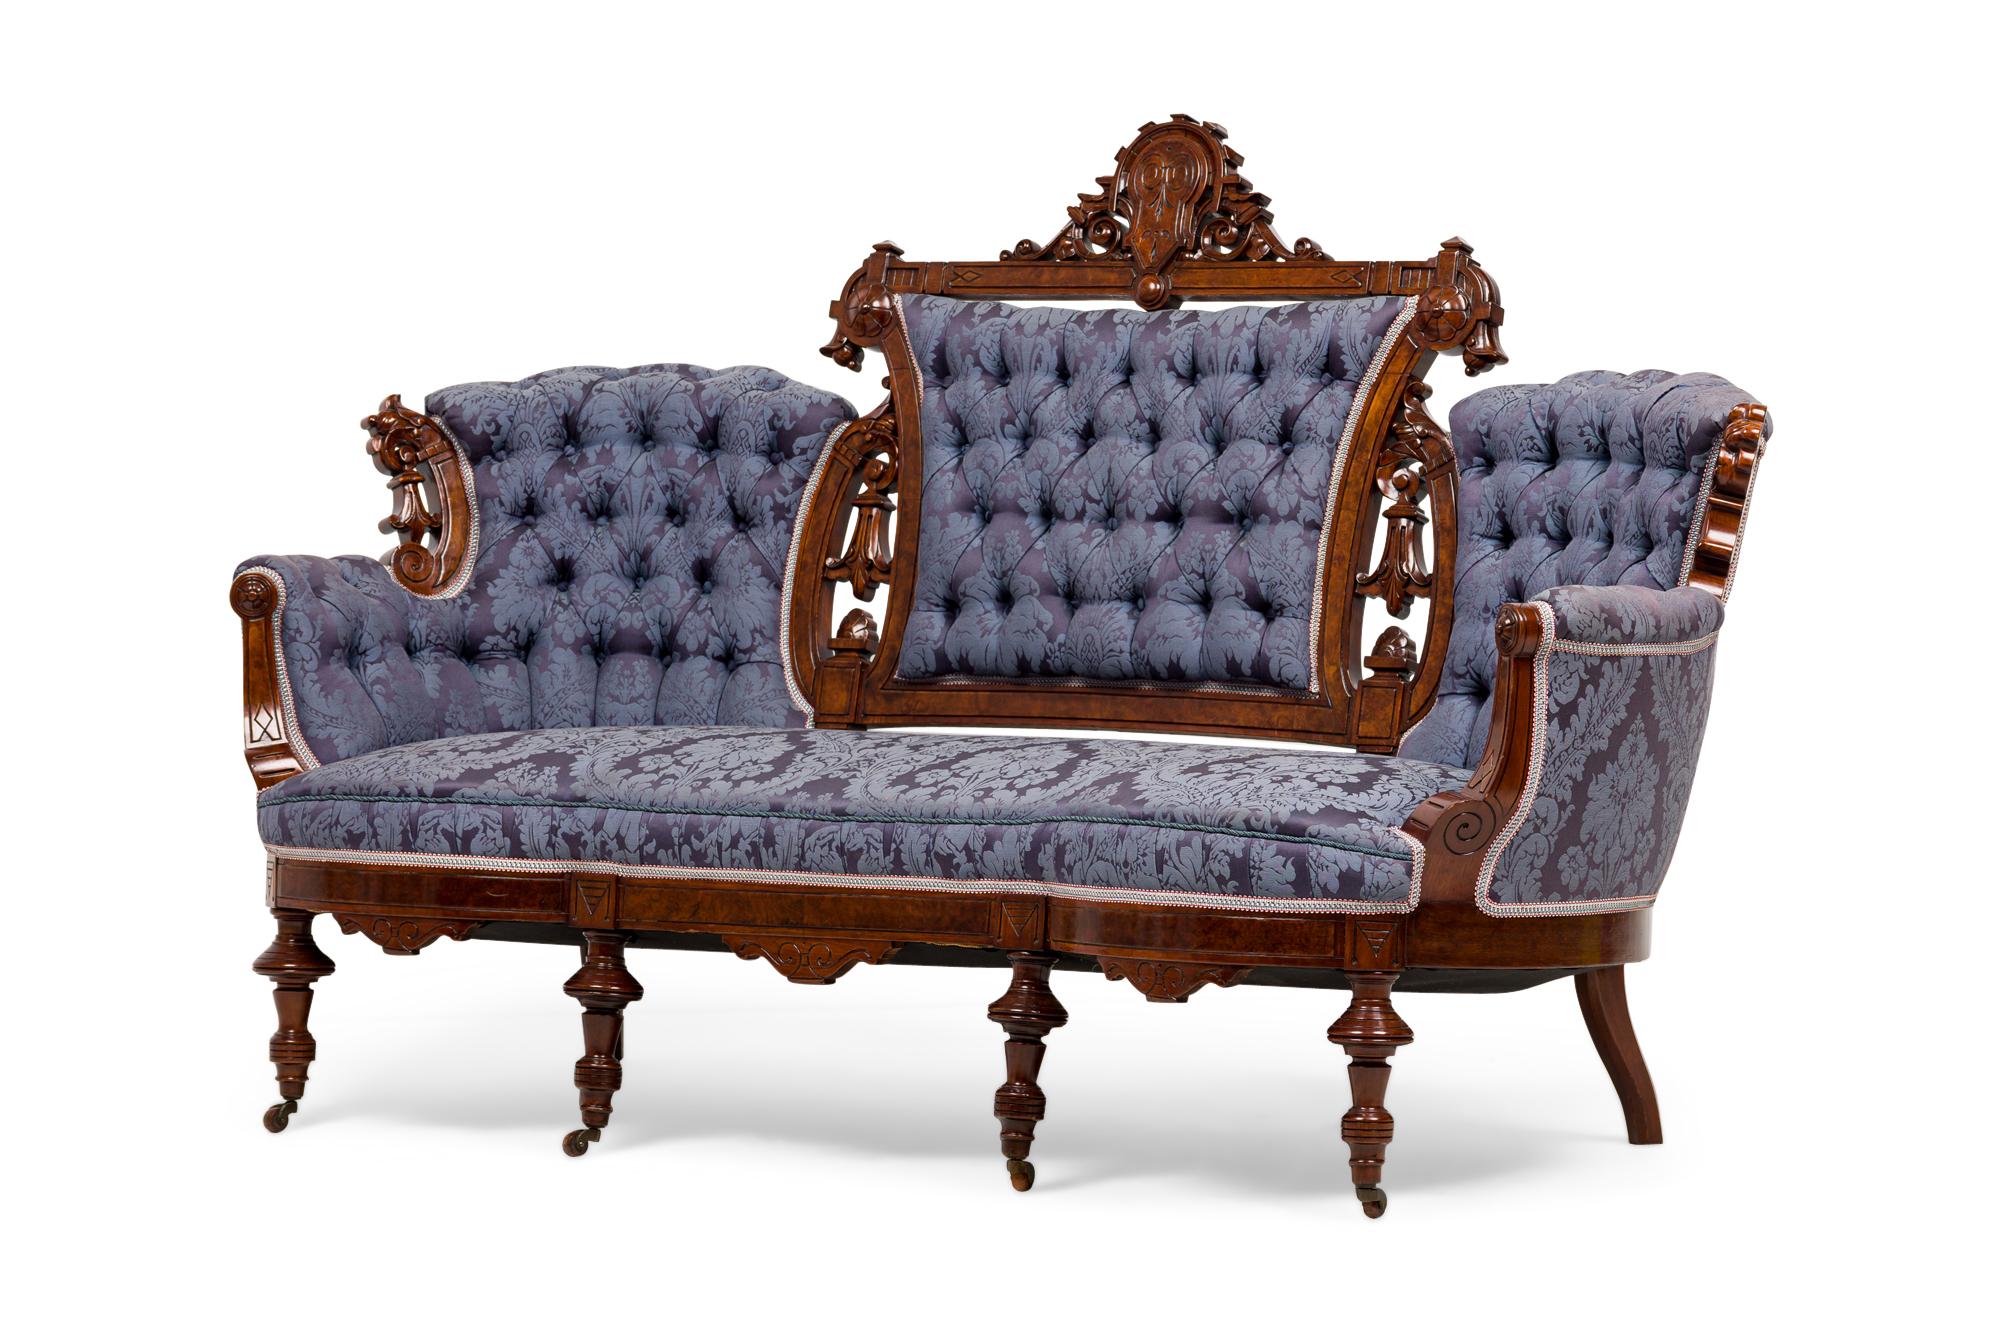 7 Piece American Victorian Upholstered Carved Mahogany Living Room Set In Good Condition For Sale In New York, NY